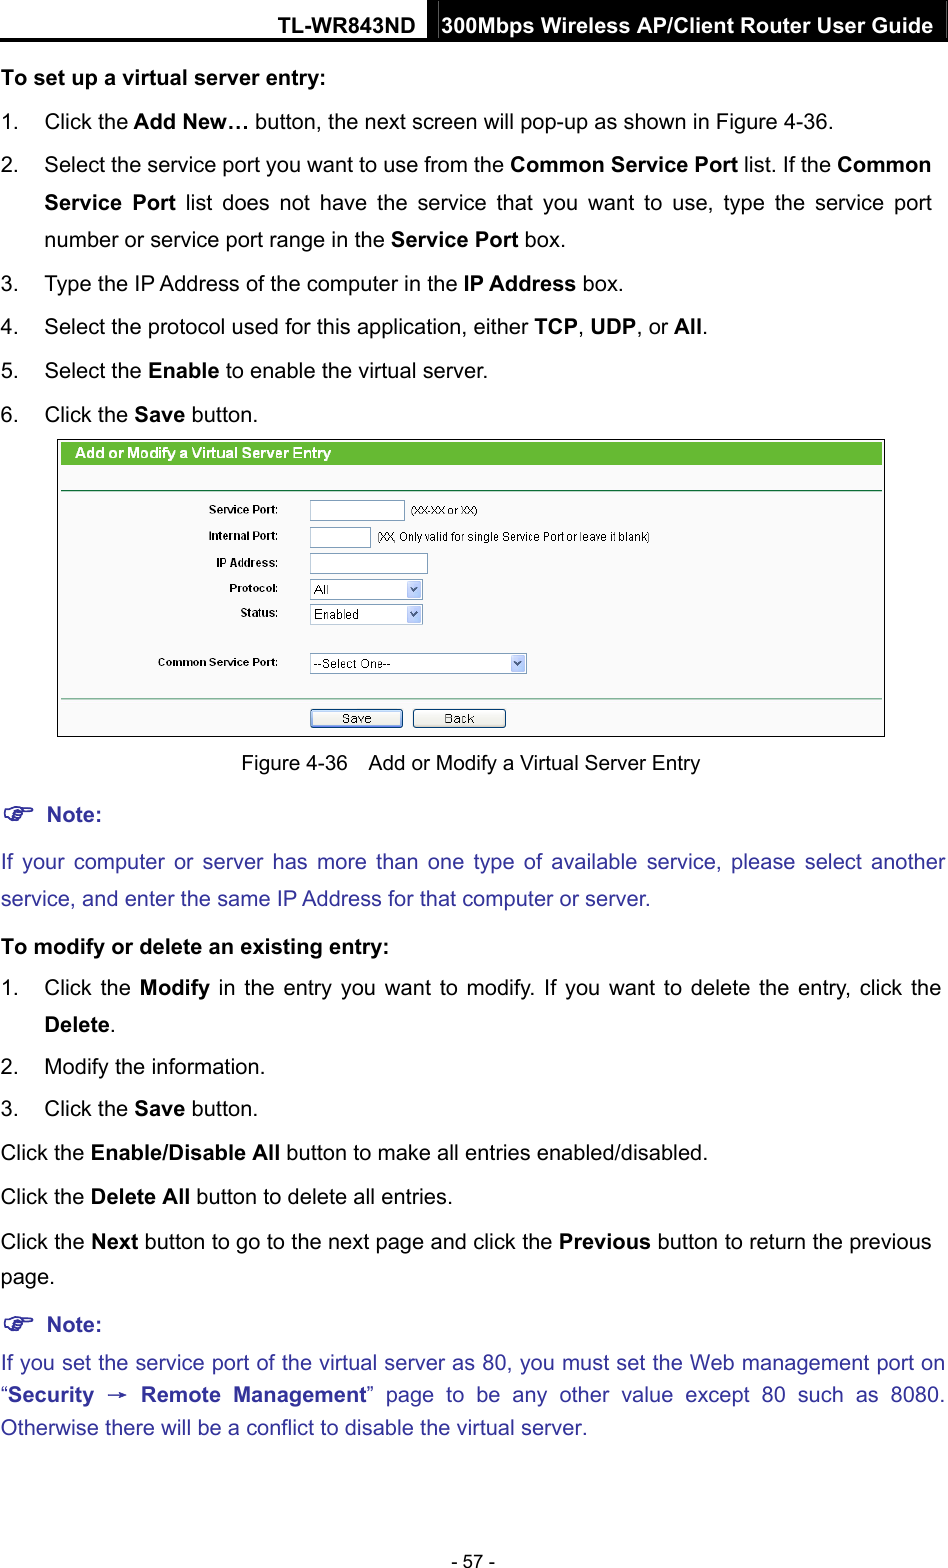 TL-WR843ND 300Mbps Wireless AP/Client Router User Guide - 57 - To set up a virtual server entry:   1. Click the Add New… button, the next screen will pop-up as shown in Figure 4-36. 2.  Select the service port you want to use from the Common Service Port list. If the Common Service Port list does not have the service that you want to use, type the service port number or service port range in the Service Port box. 3.  Type the IP Address of the computer in the IP Address box.  4.  Select the protocol used for this application, either TCP, UDP, or All. 5. Select the Enable to enable the virtual server. 6. Click the Save button.    Figure 4-36    Add or Modify a Virtual Server Entry  Note: If your computer or server has more than one type of available service, please select another service, and enter the same IP Address for that computer or server. To modify or delete an existing entry: 1. Click the Modify in the entry you want to modify. If you want to delete the entry, click the Delete. 2.  Modify the information.   3. Click the Save button. Click the Enable/Disable All button to make all entries enabled/disabled. Click the Delete All button to delete all entries. Click the Next button to go to the next page and click the Previous button to return the previous page.  Note: If you set the service port of the virtual server as 80, you must set the Web management port on “Security  → Remote Management” page to be any other value except 80 such as 8080. Otherwise there will be a conflict to disable the virtual server. 